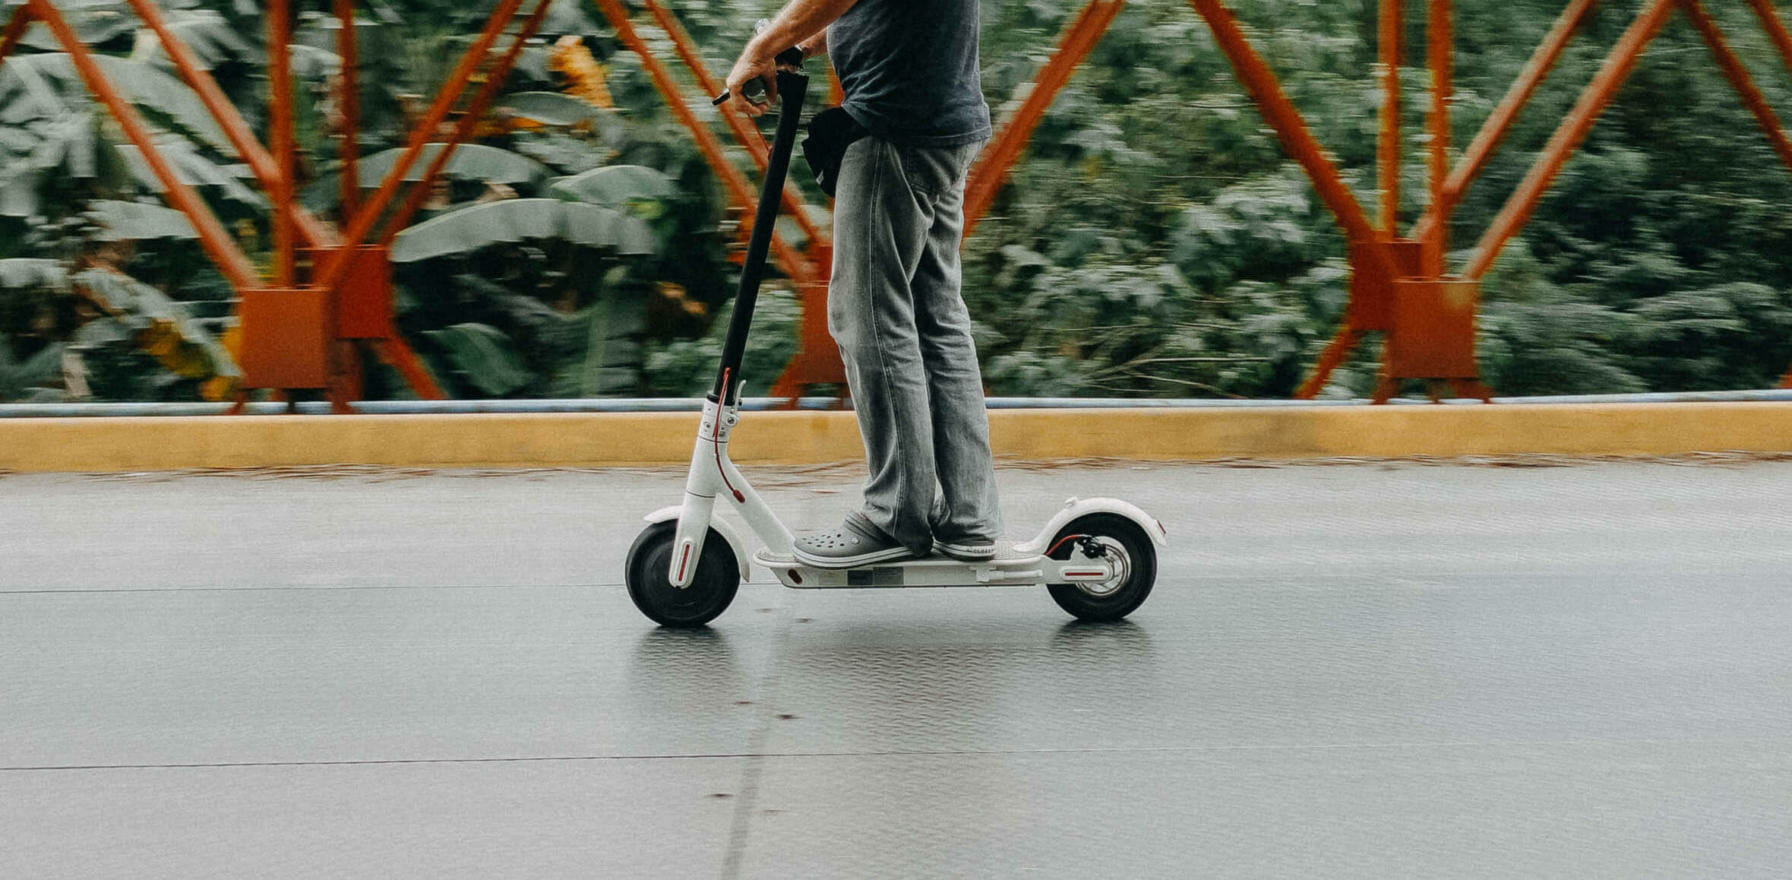 Man riding on scooter